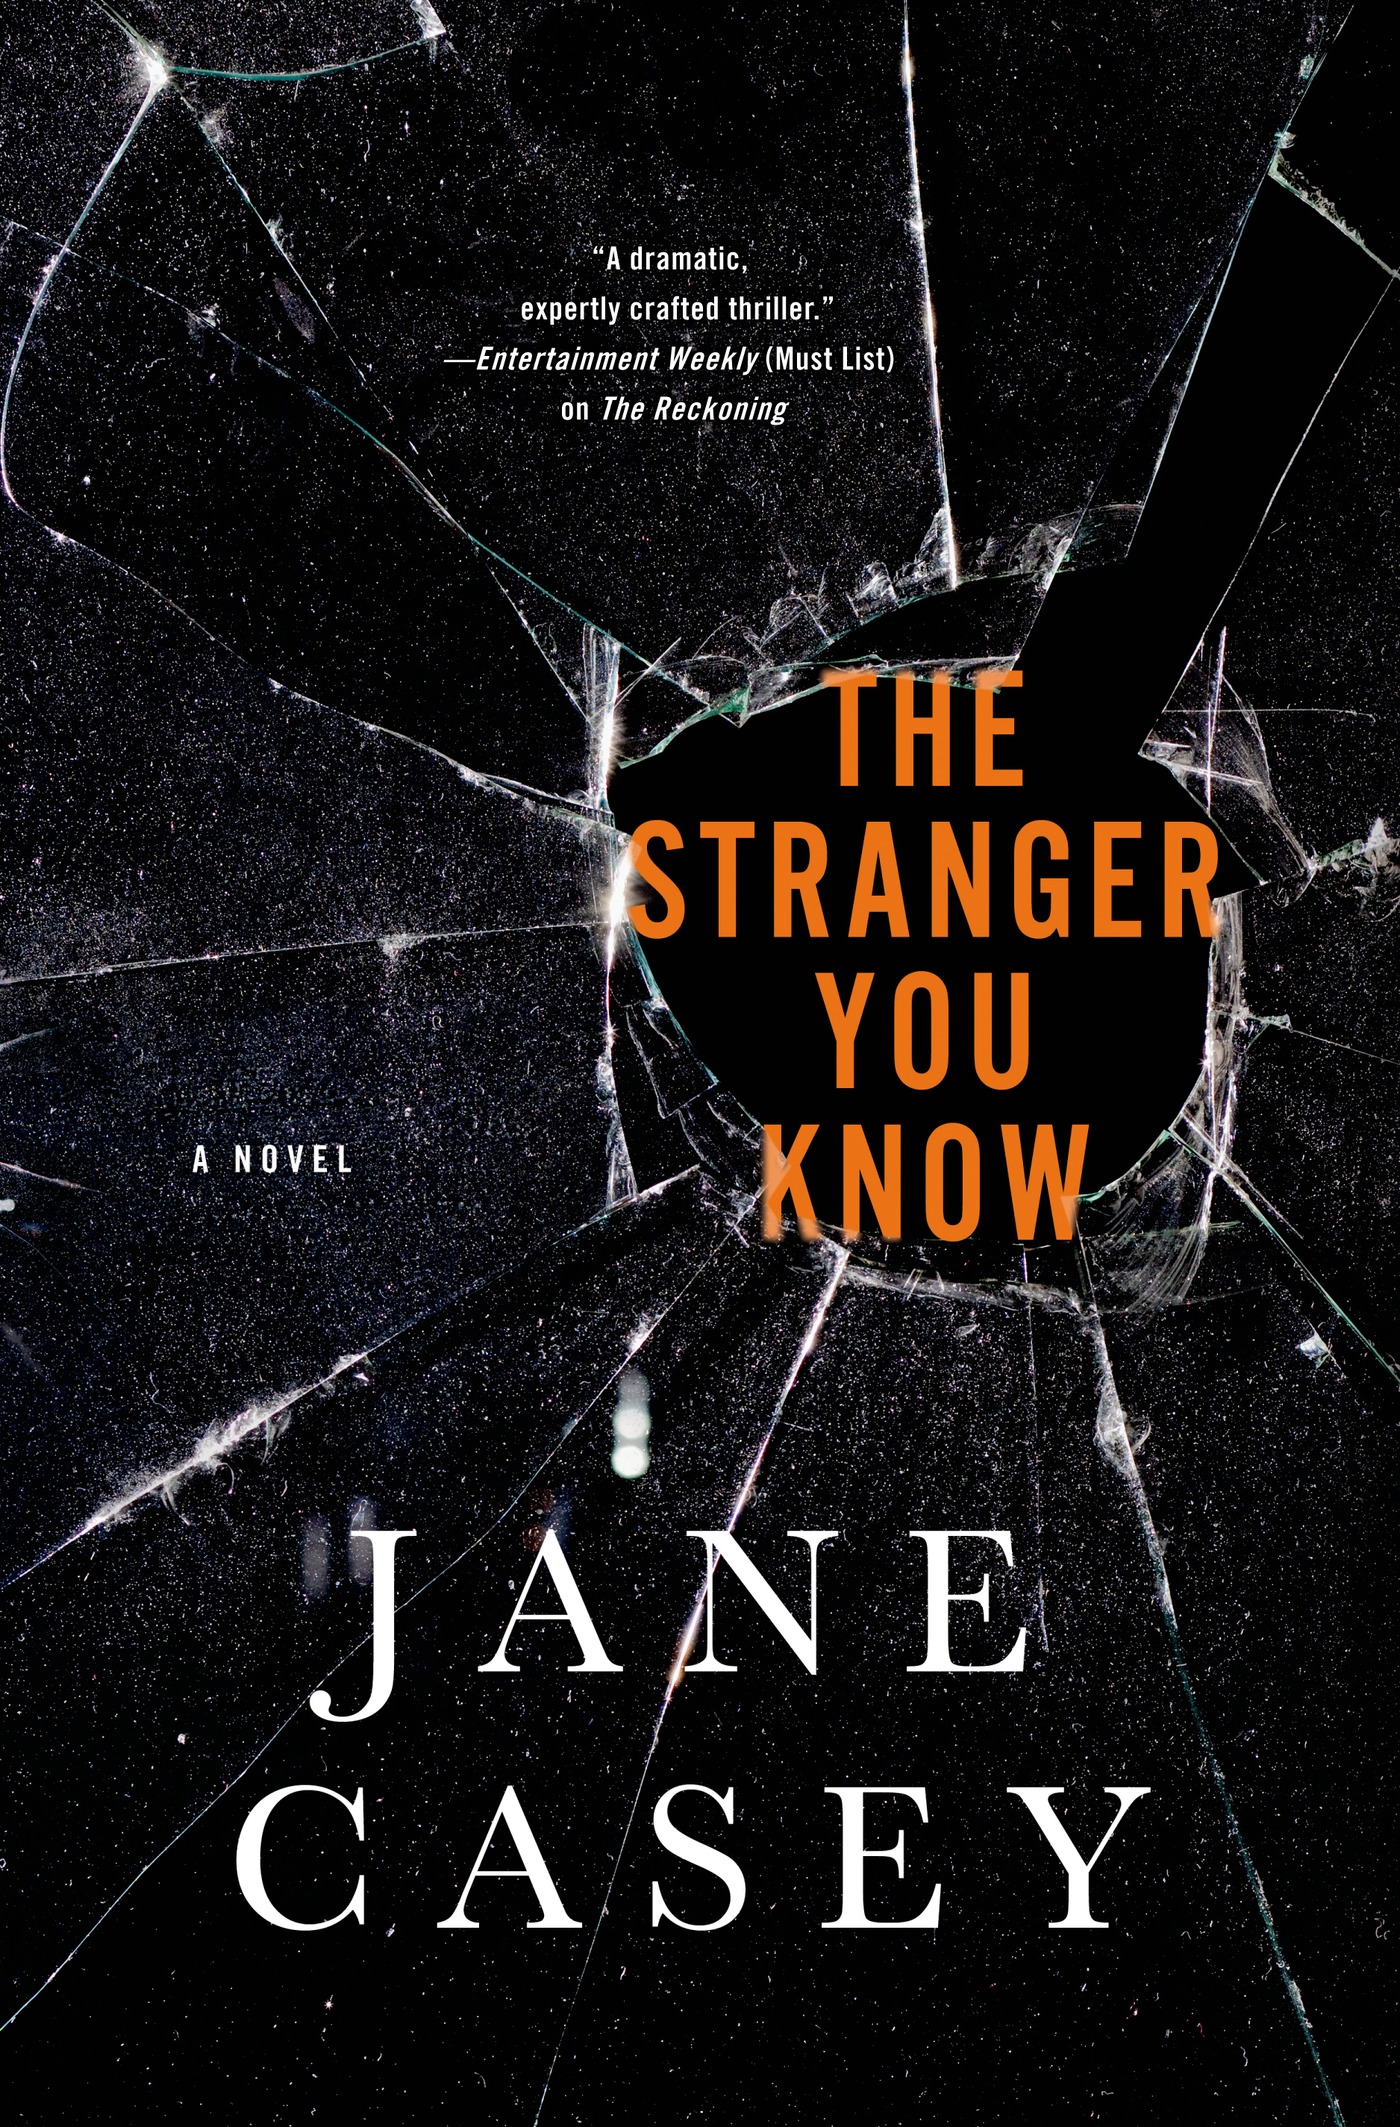 The stranger you know cover image